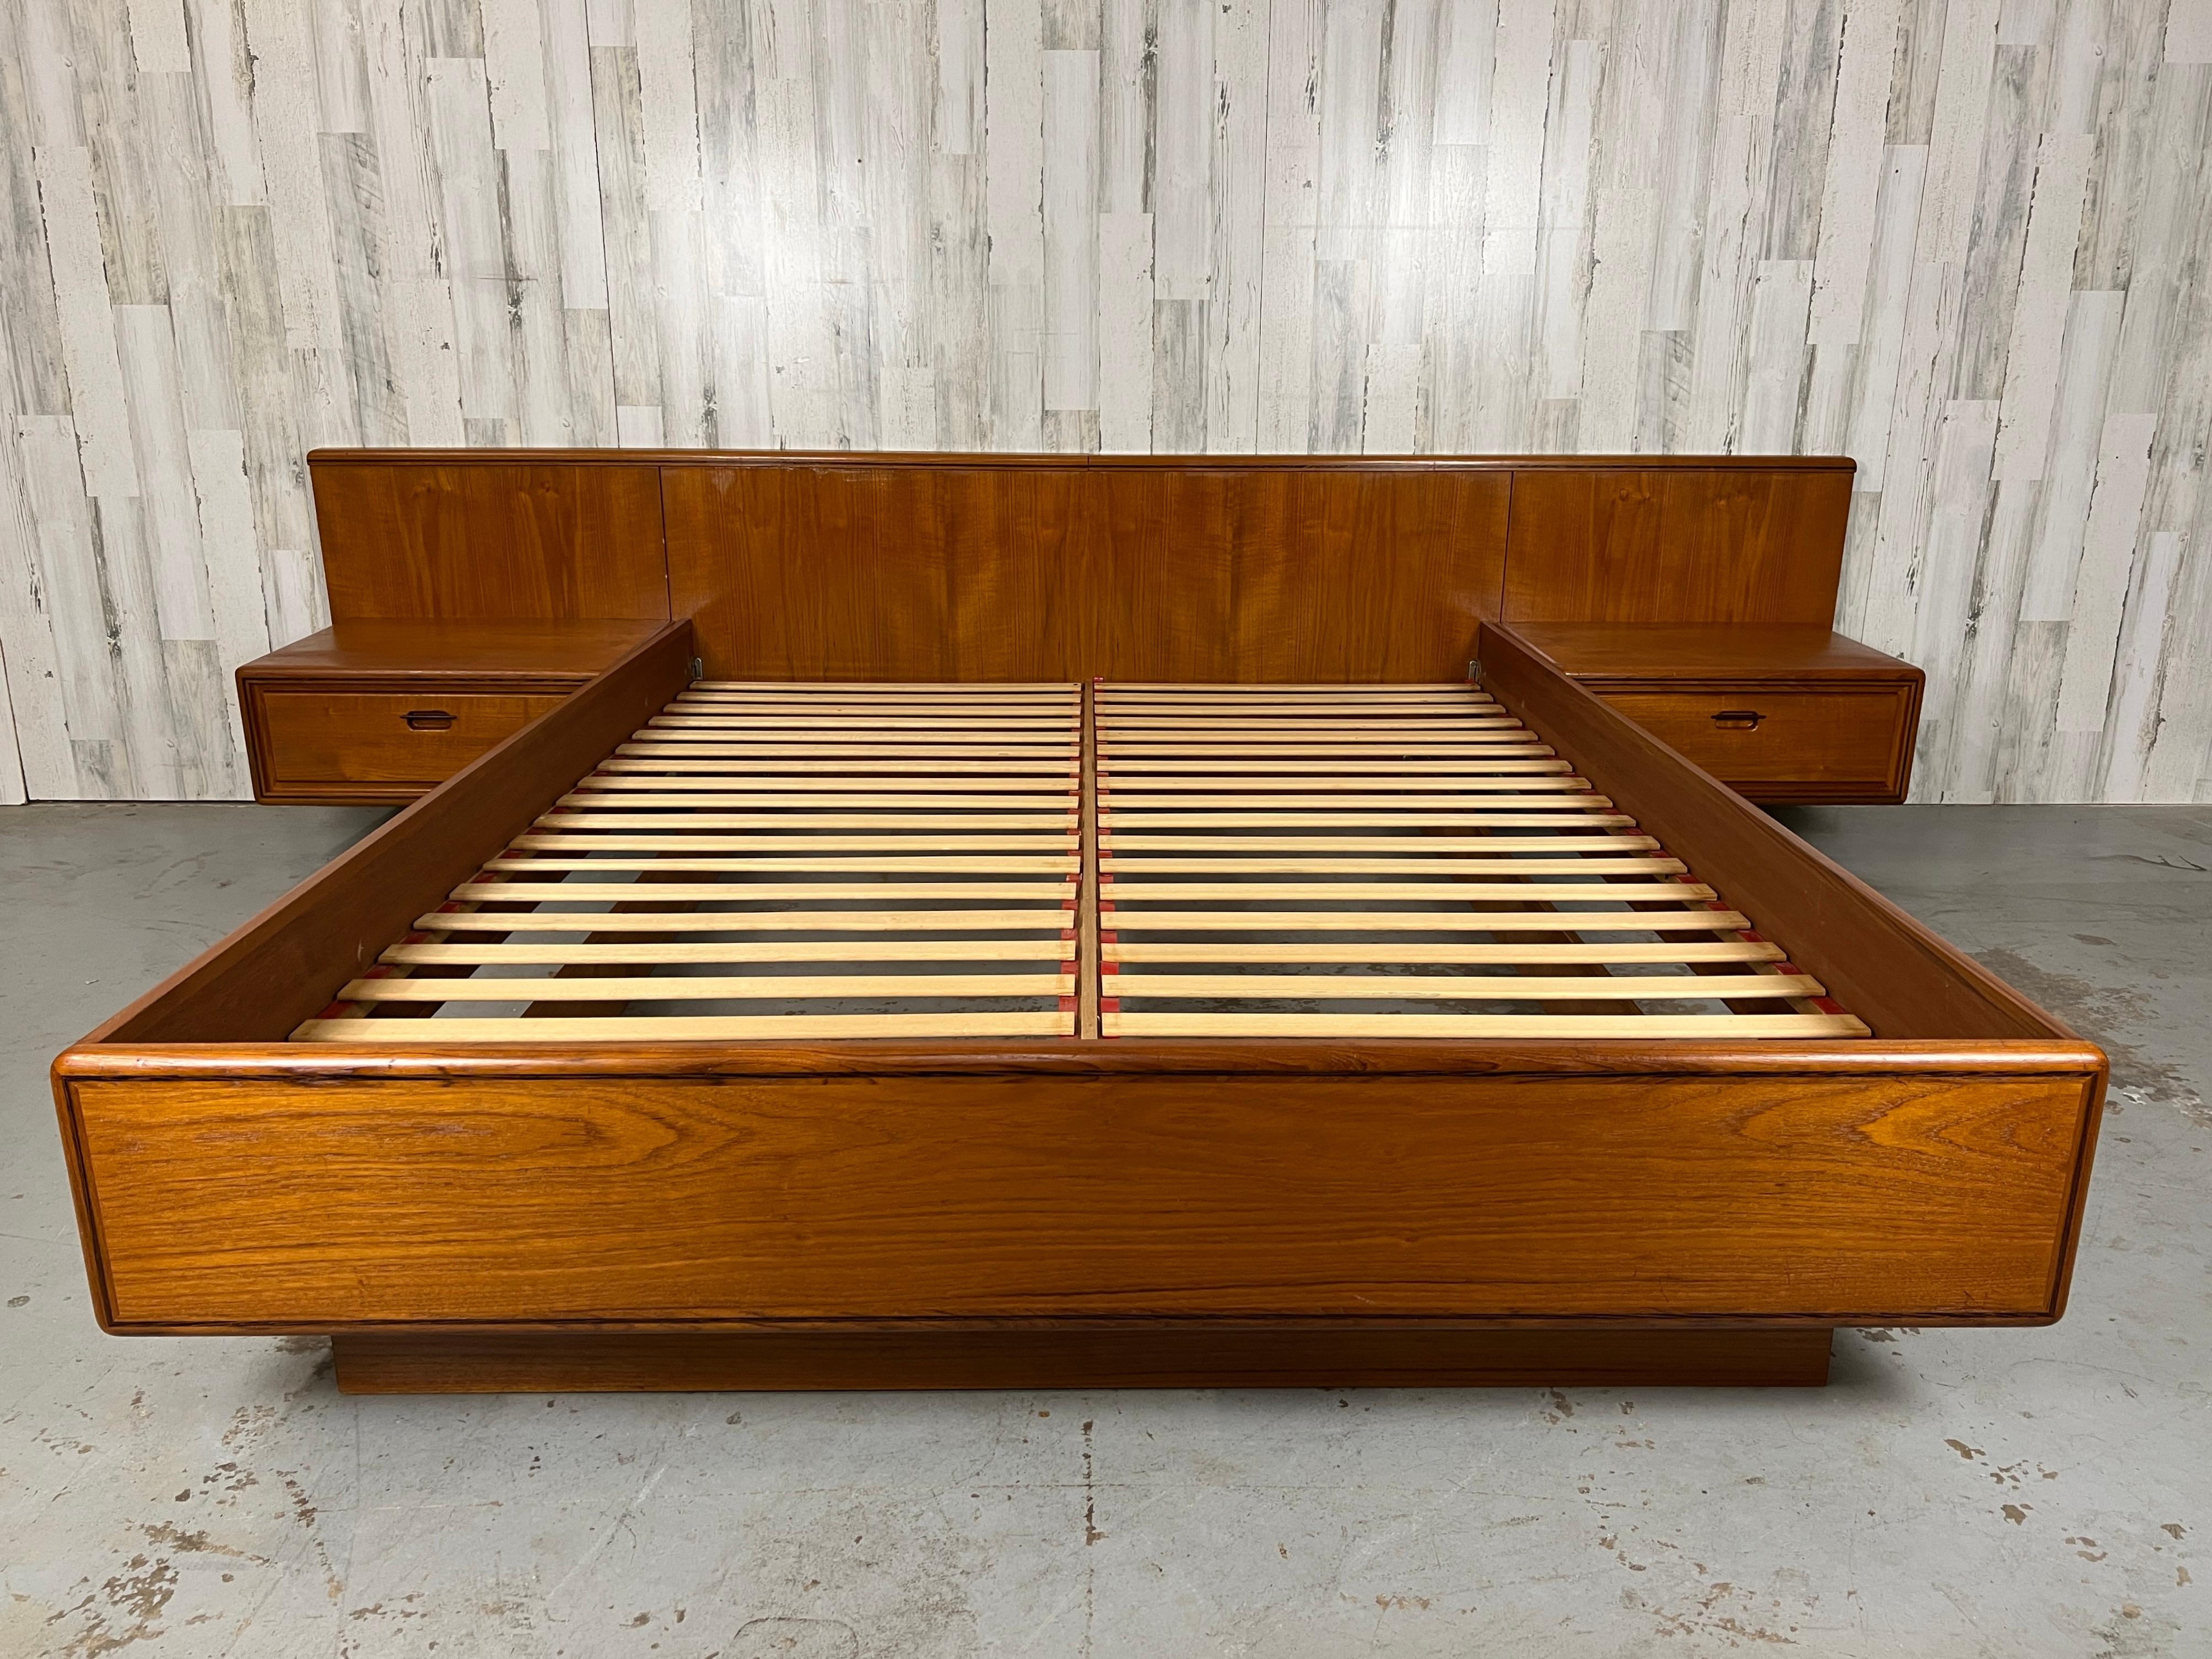 Teak platform floating bed & nightstands queen sized. Teak railing, headboard, and nightstands with sculpted wood drawer pulls. 

Each nightstand: 25 L x 18.5 D x 9.75 H
Floor to rail: 15.5 H.